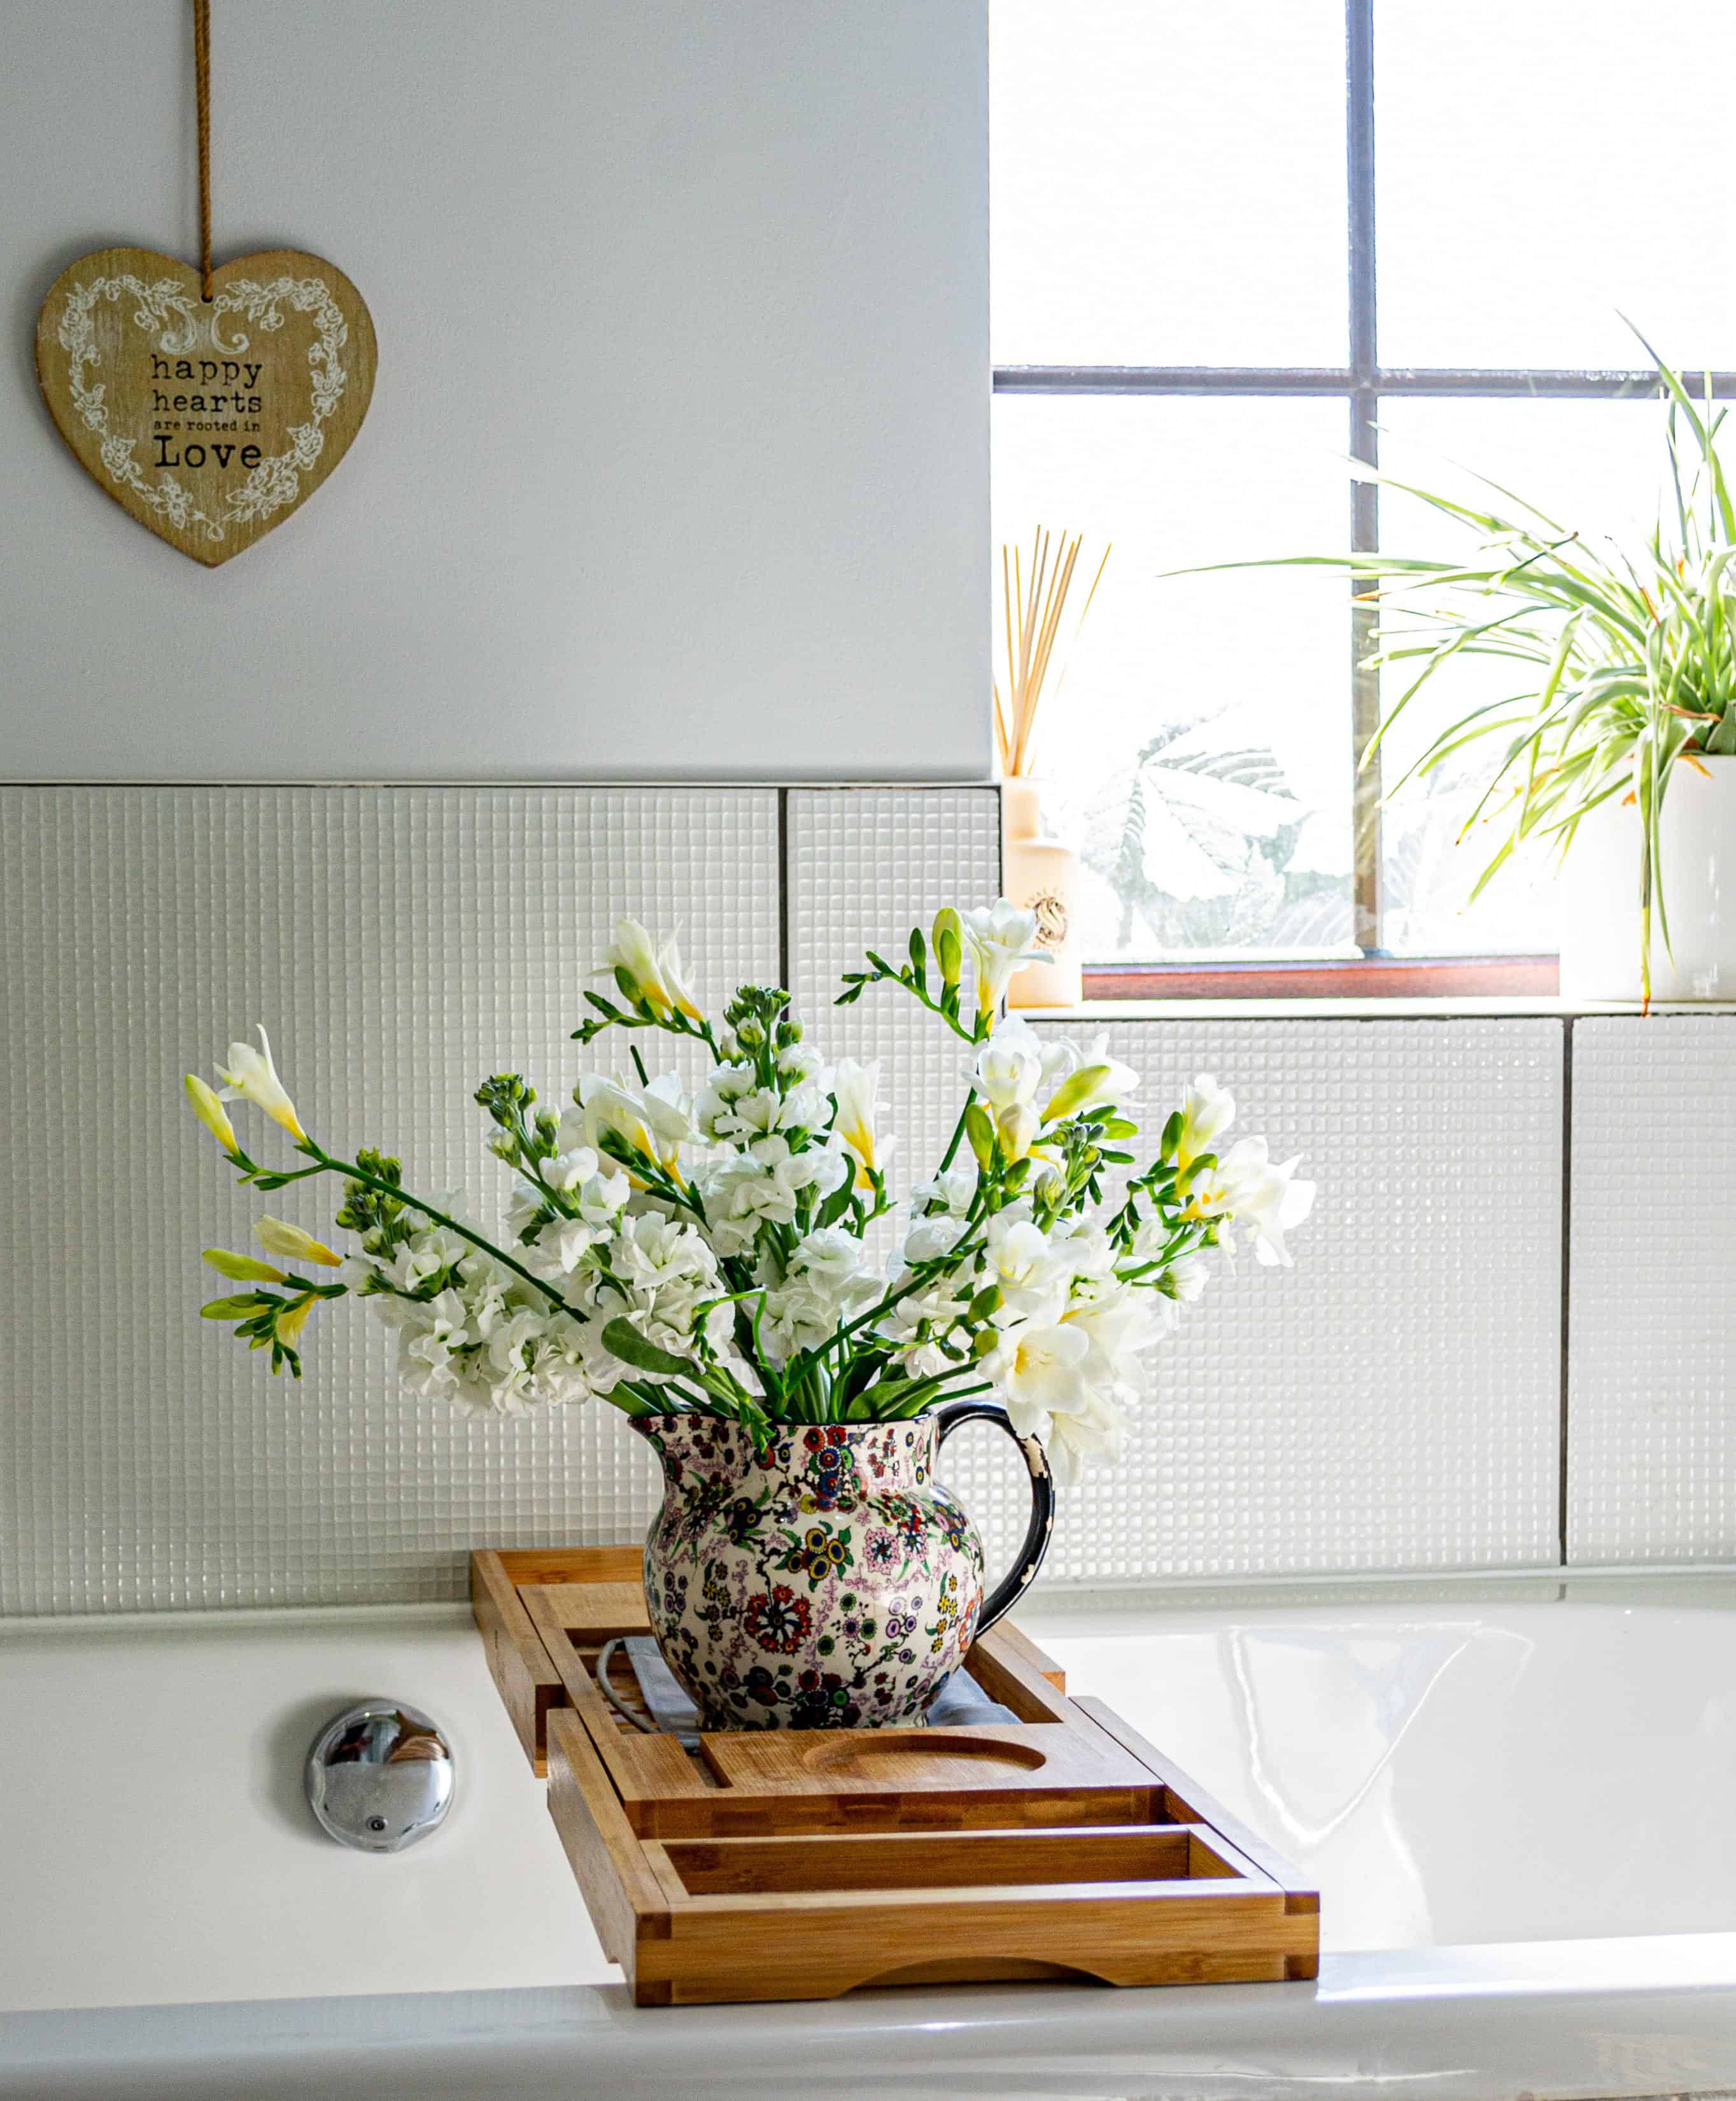 Bathtub with wooden tray across it and spring flowers in a patterned jug.